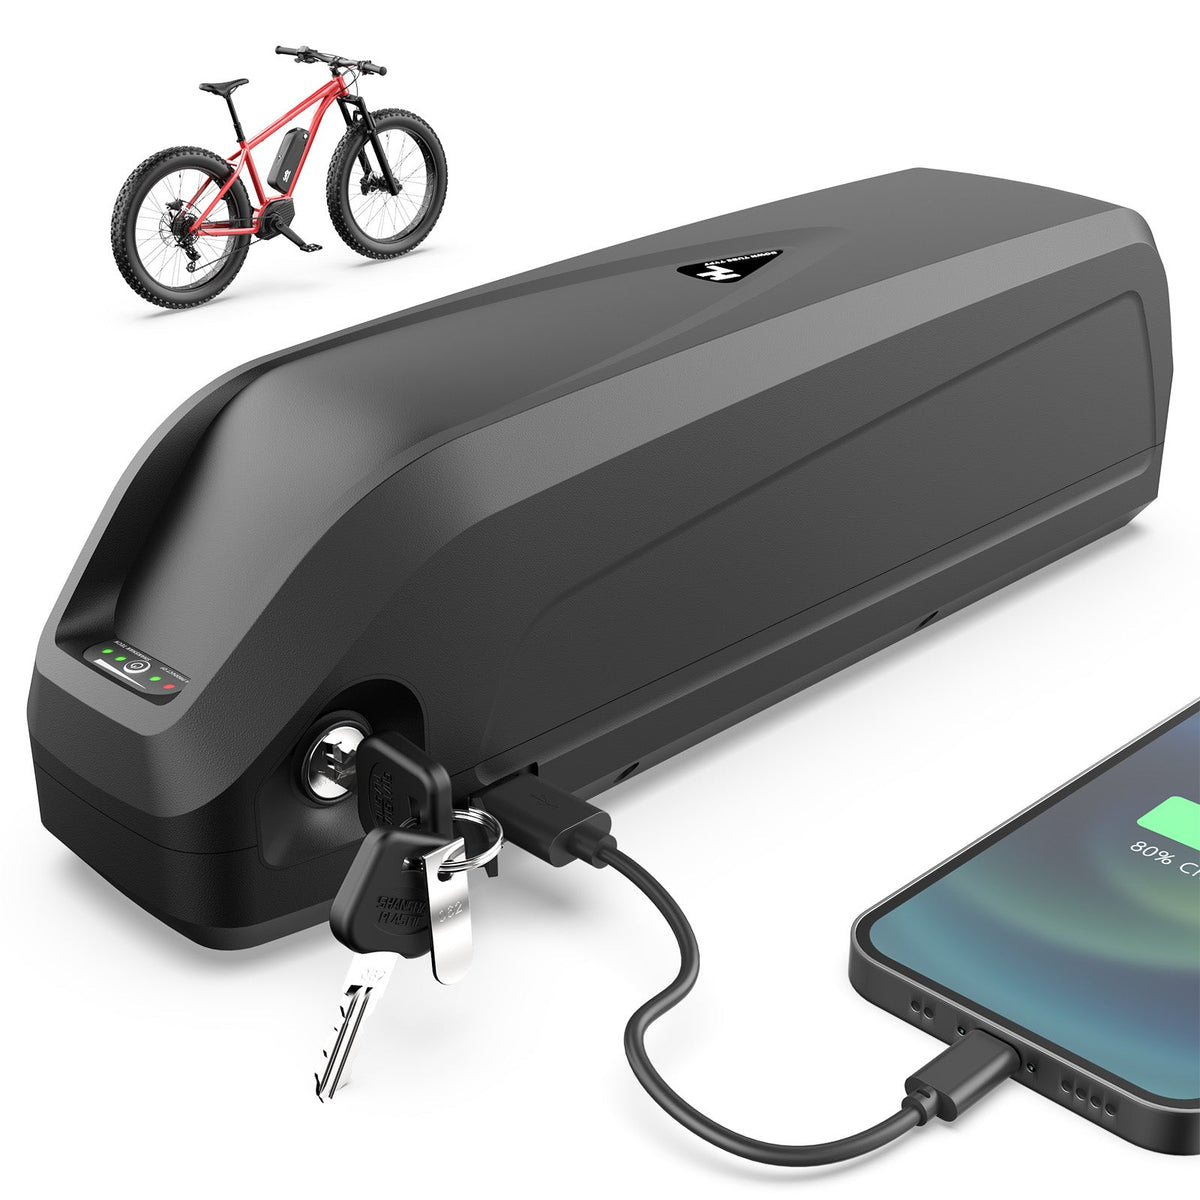 Ebike Battery 48V 20AH Lithium ion Battery with Charger, USB Port for Electric Bike 1000w - BMS EBike Tech Ltd